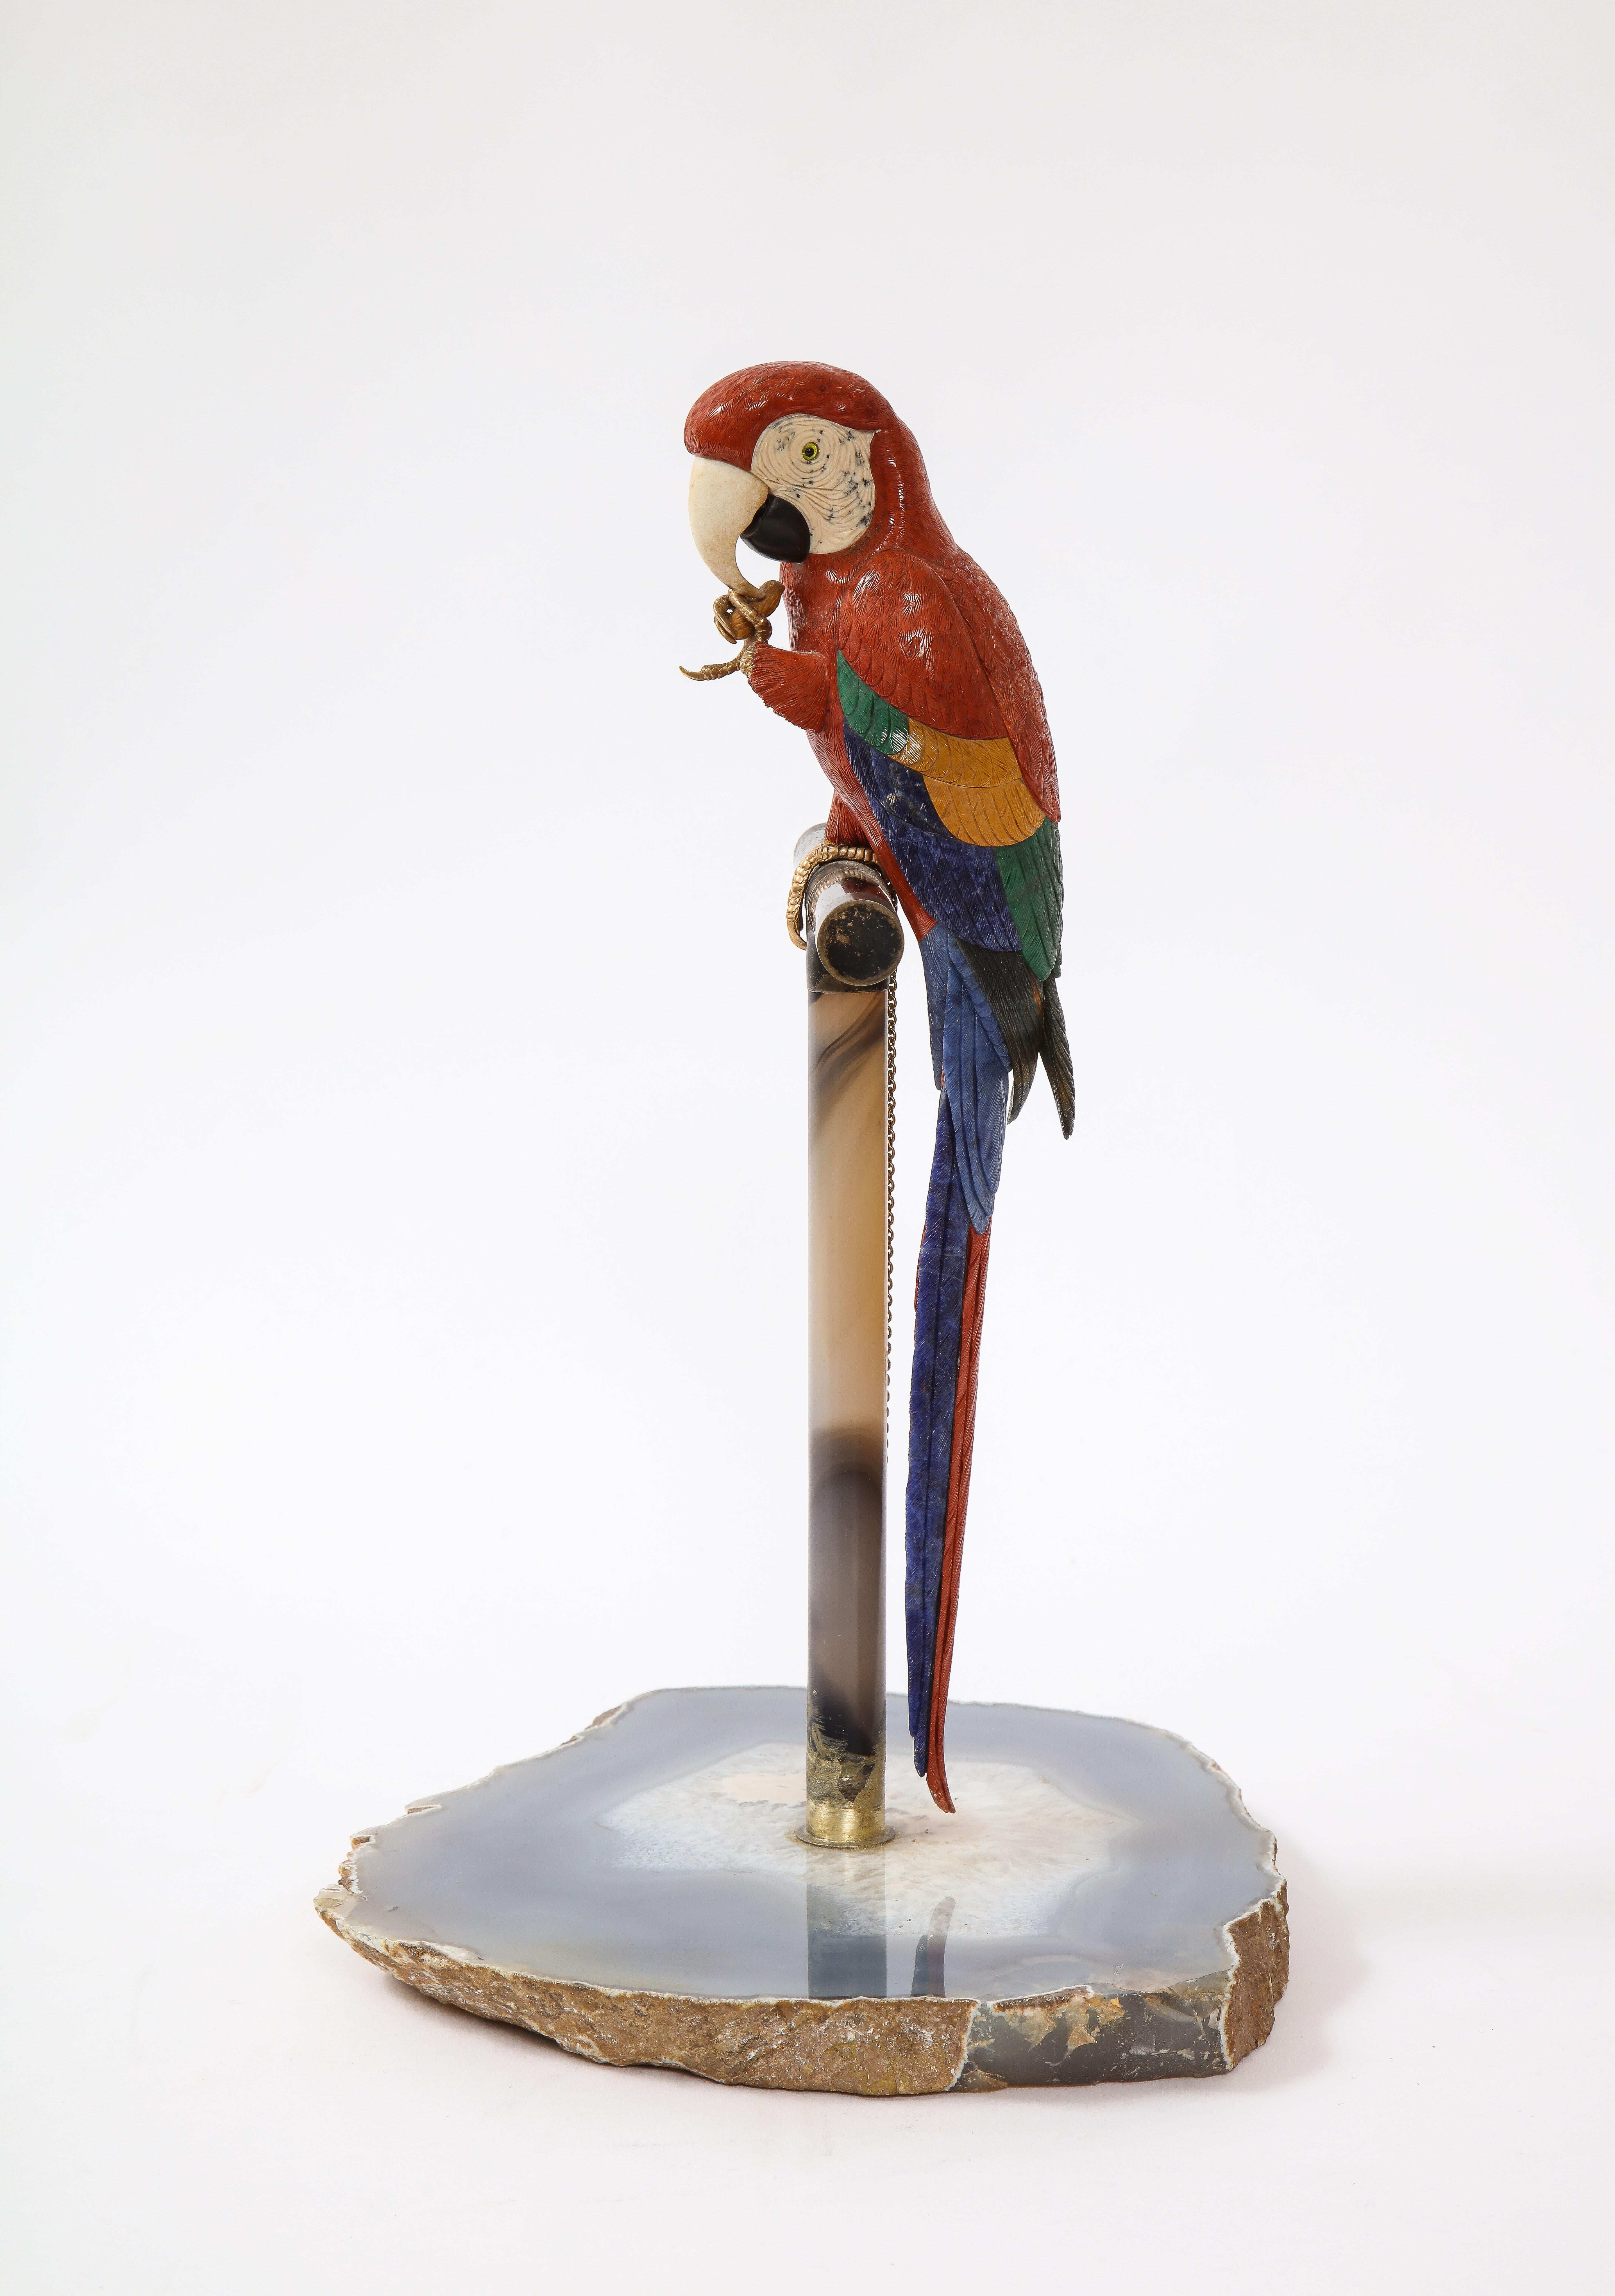 A fantastic Multi-Semi Precious Stone and Metal Mounted Model of a Scarlet Macaw Parrot, Attributed to Peter Müller, Swiss. This regal Scarlet Macaw is perched on a royal hand-carved agate pilar which rests on a sliced round agate slab. The